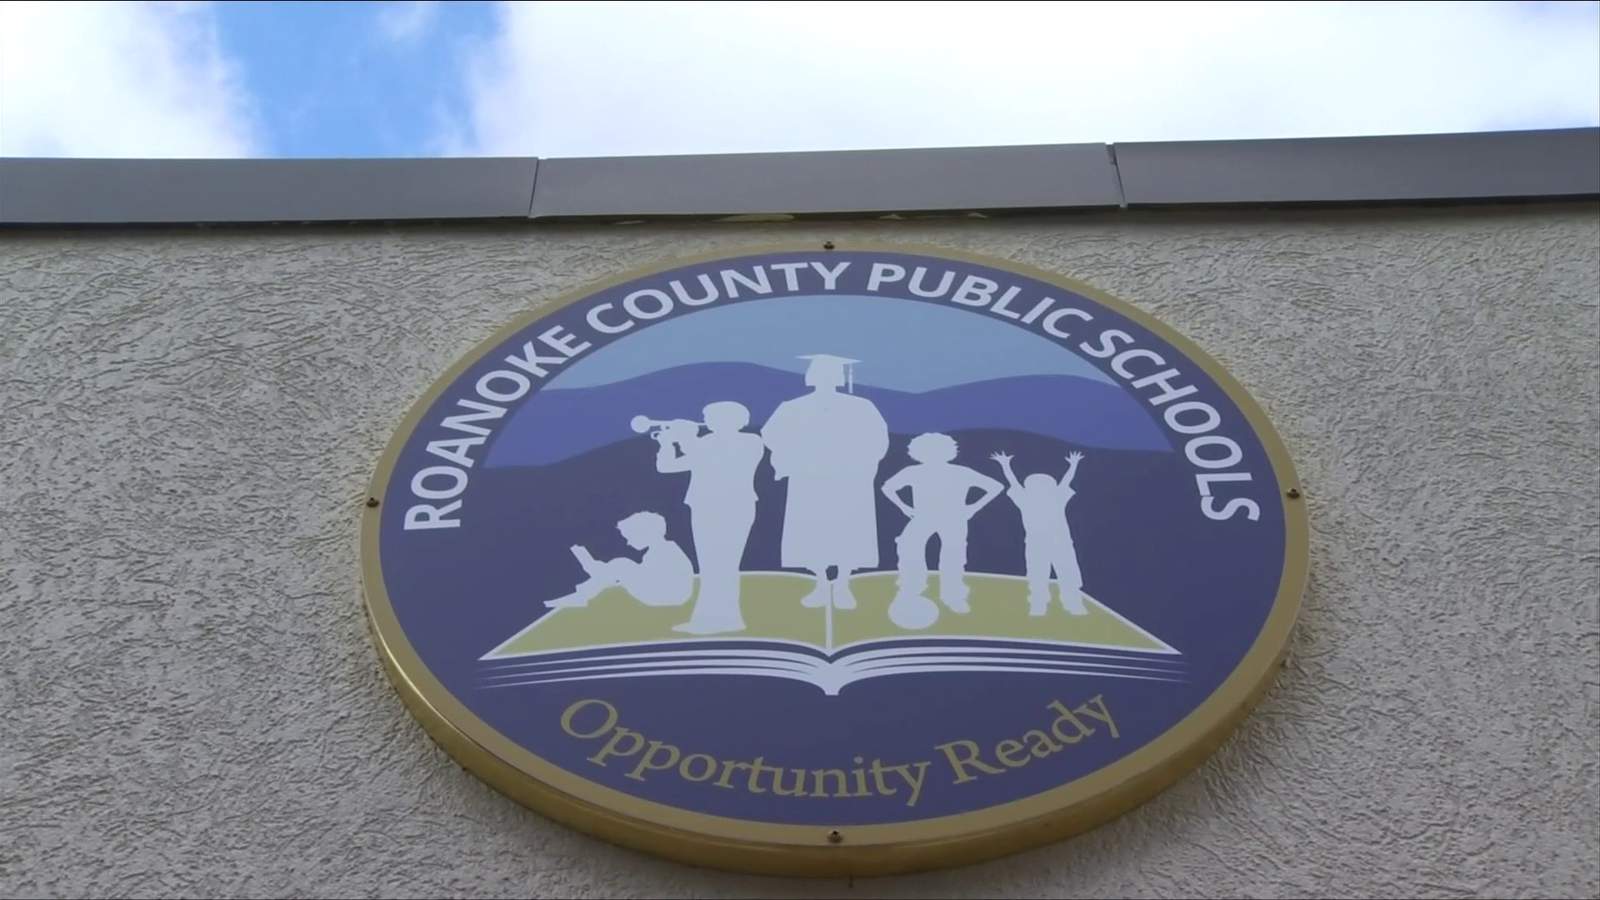 Roanoke County now allowing high school sports practices, games among county teams